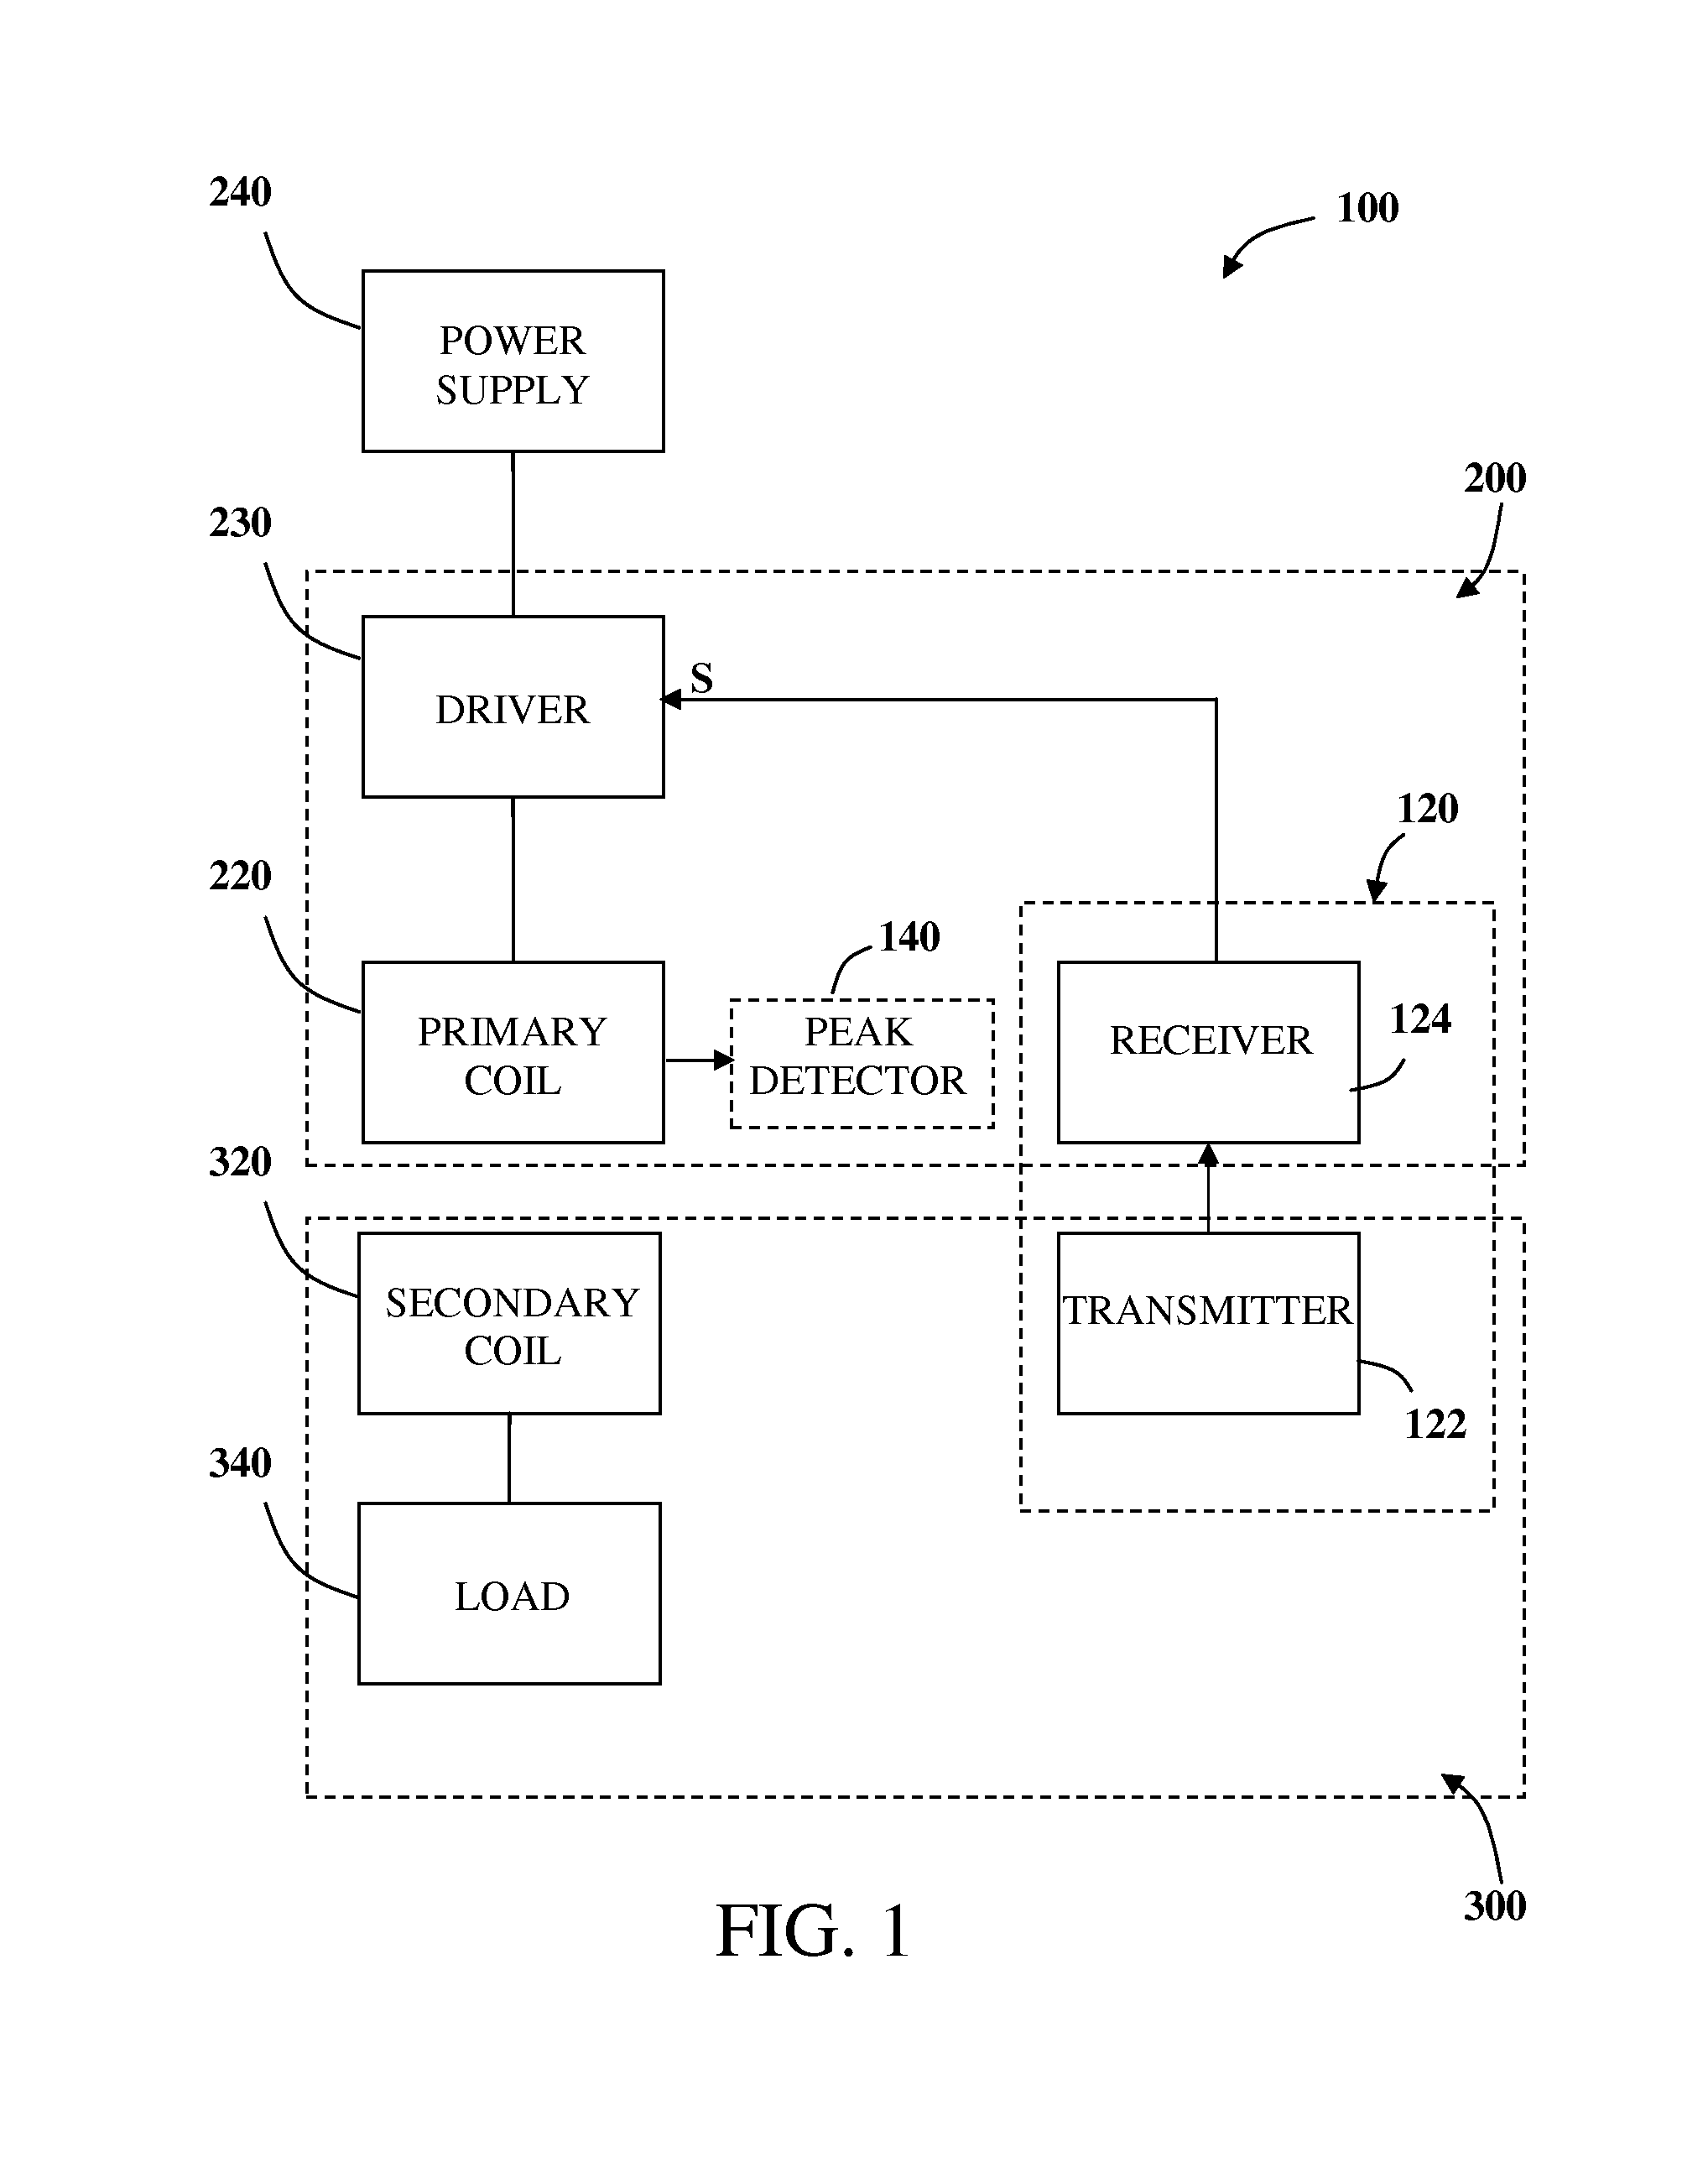 Inductive power transmission system and method for concurrently transmitting digital messages